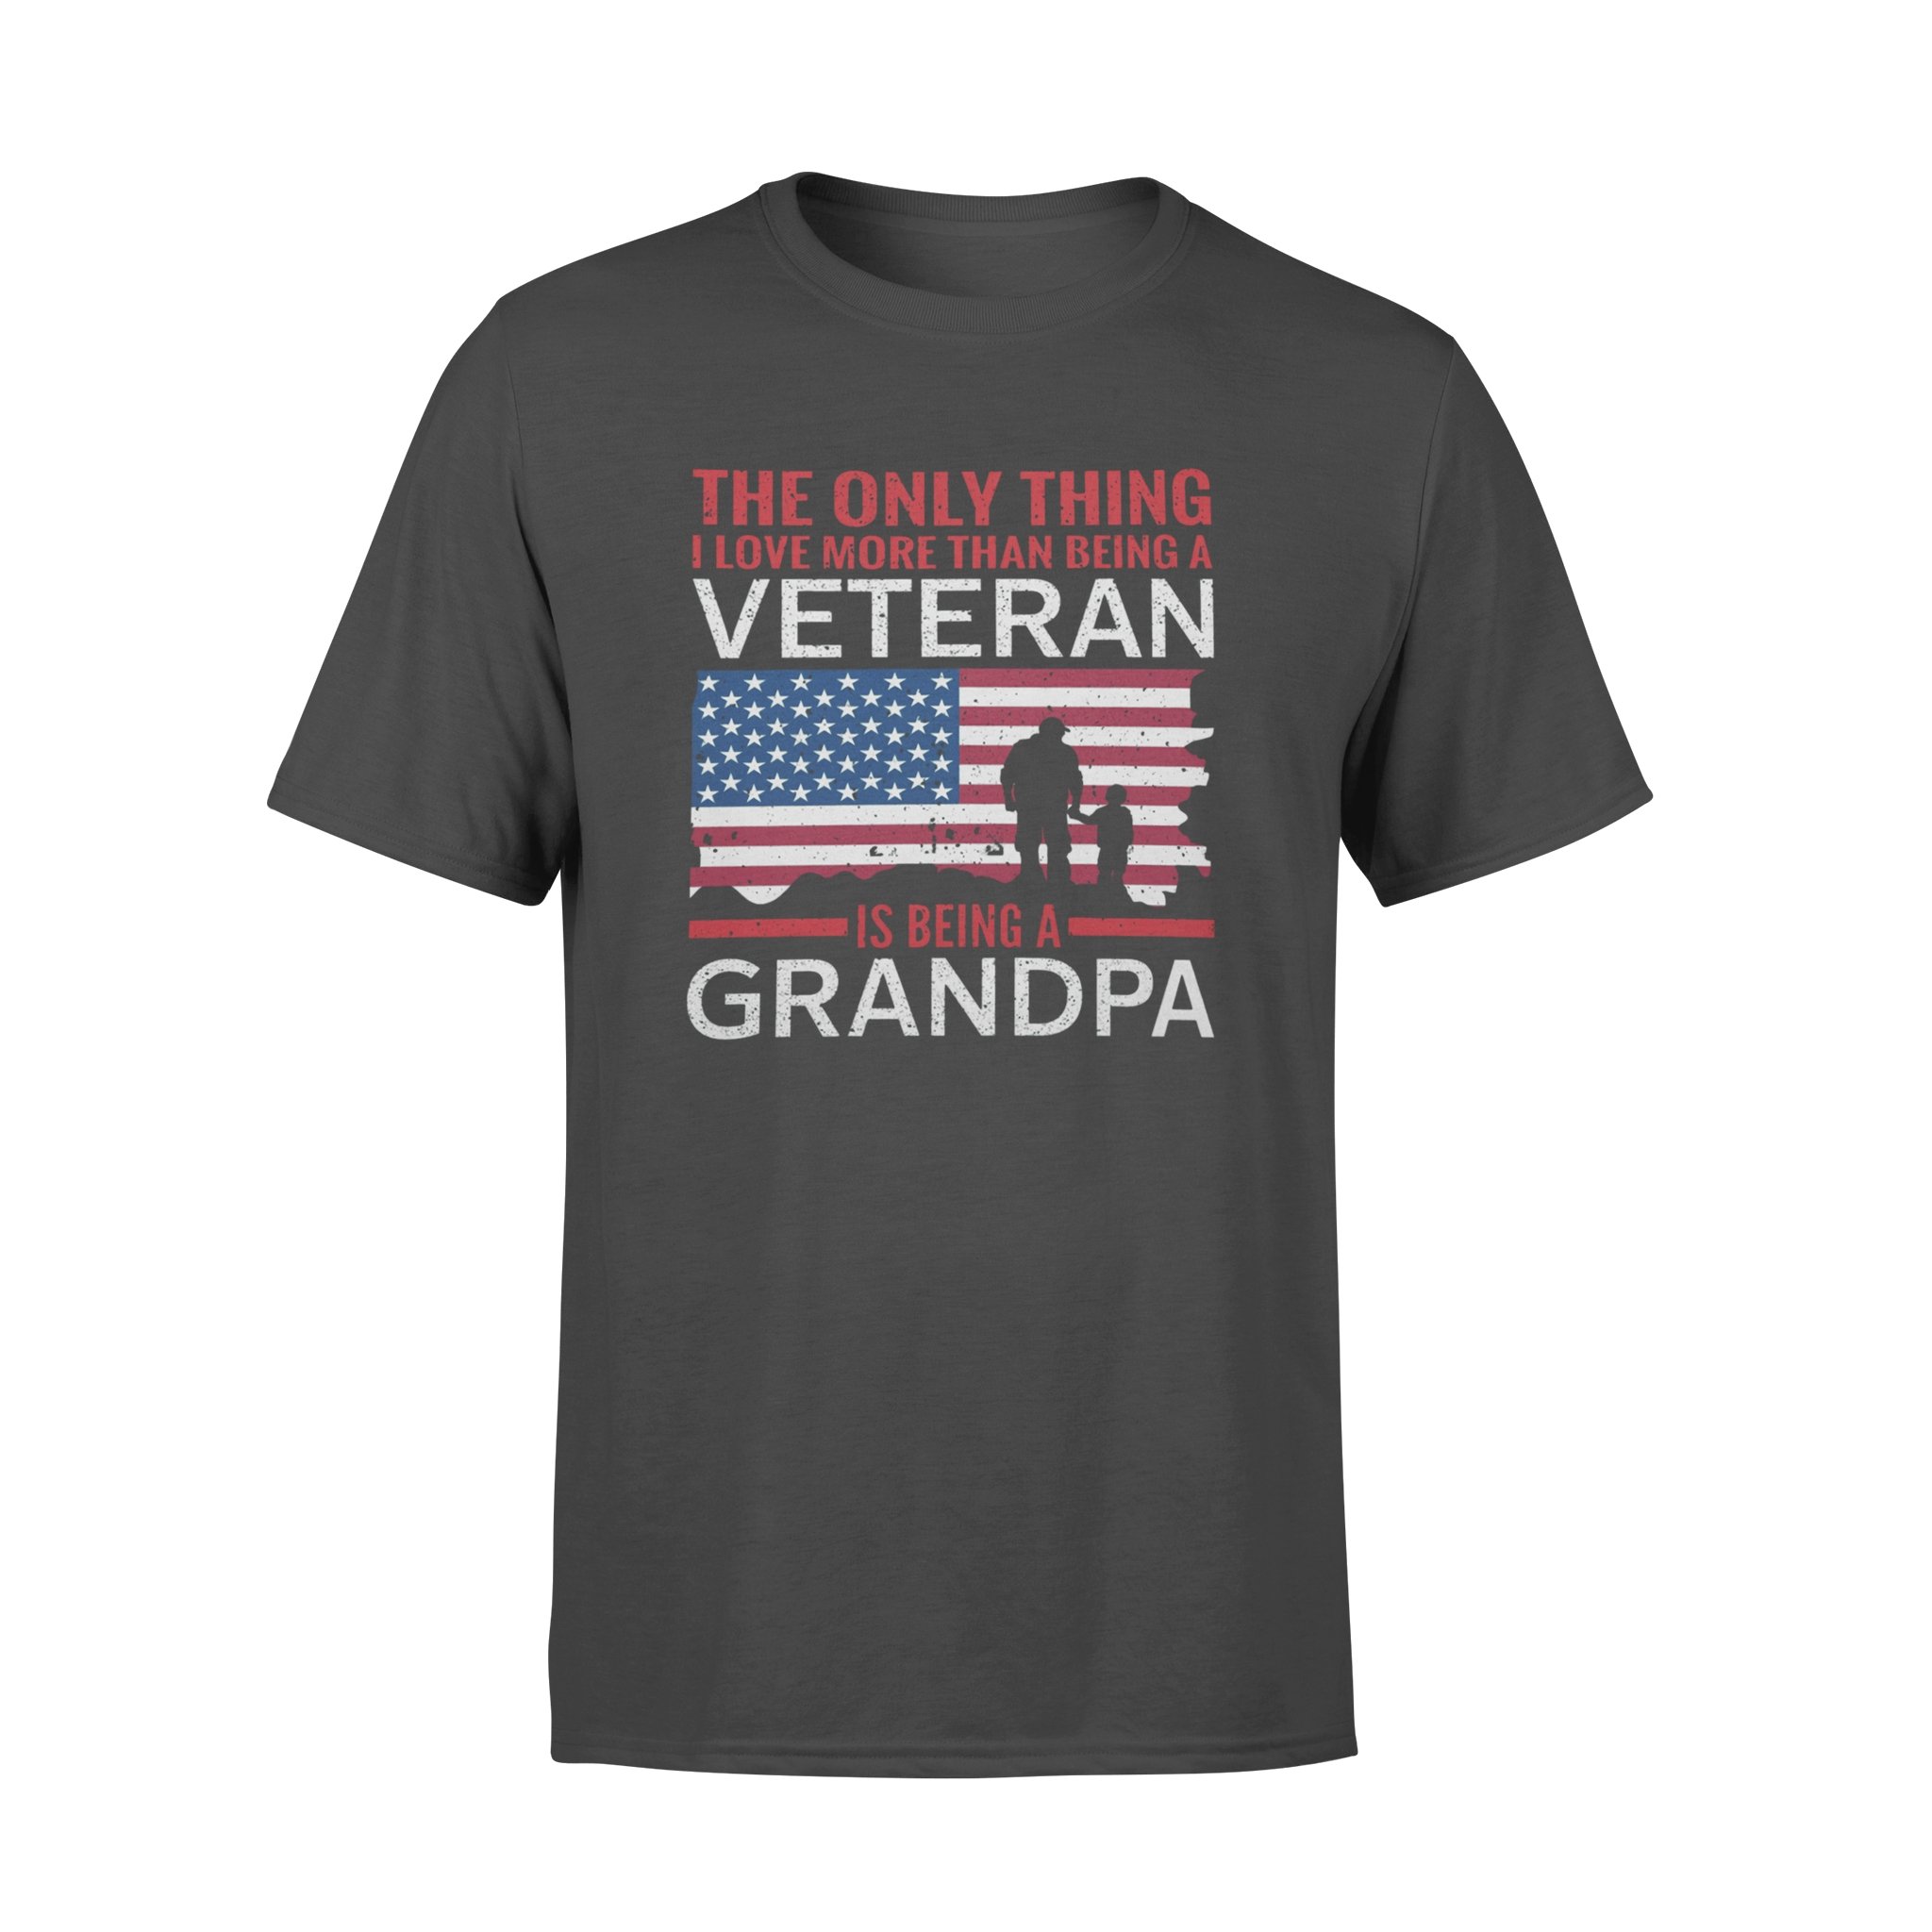 THE ONLY THING I LOVE MORE THAN BEING A VETERAN IS BEING A GRANDPA,  GIFTS FOR GRANDPA,GRANDPA SHIRT,GRANDPA GIFTS,FATHER?S DAY GIFT,PLUS SIZE SHIRT